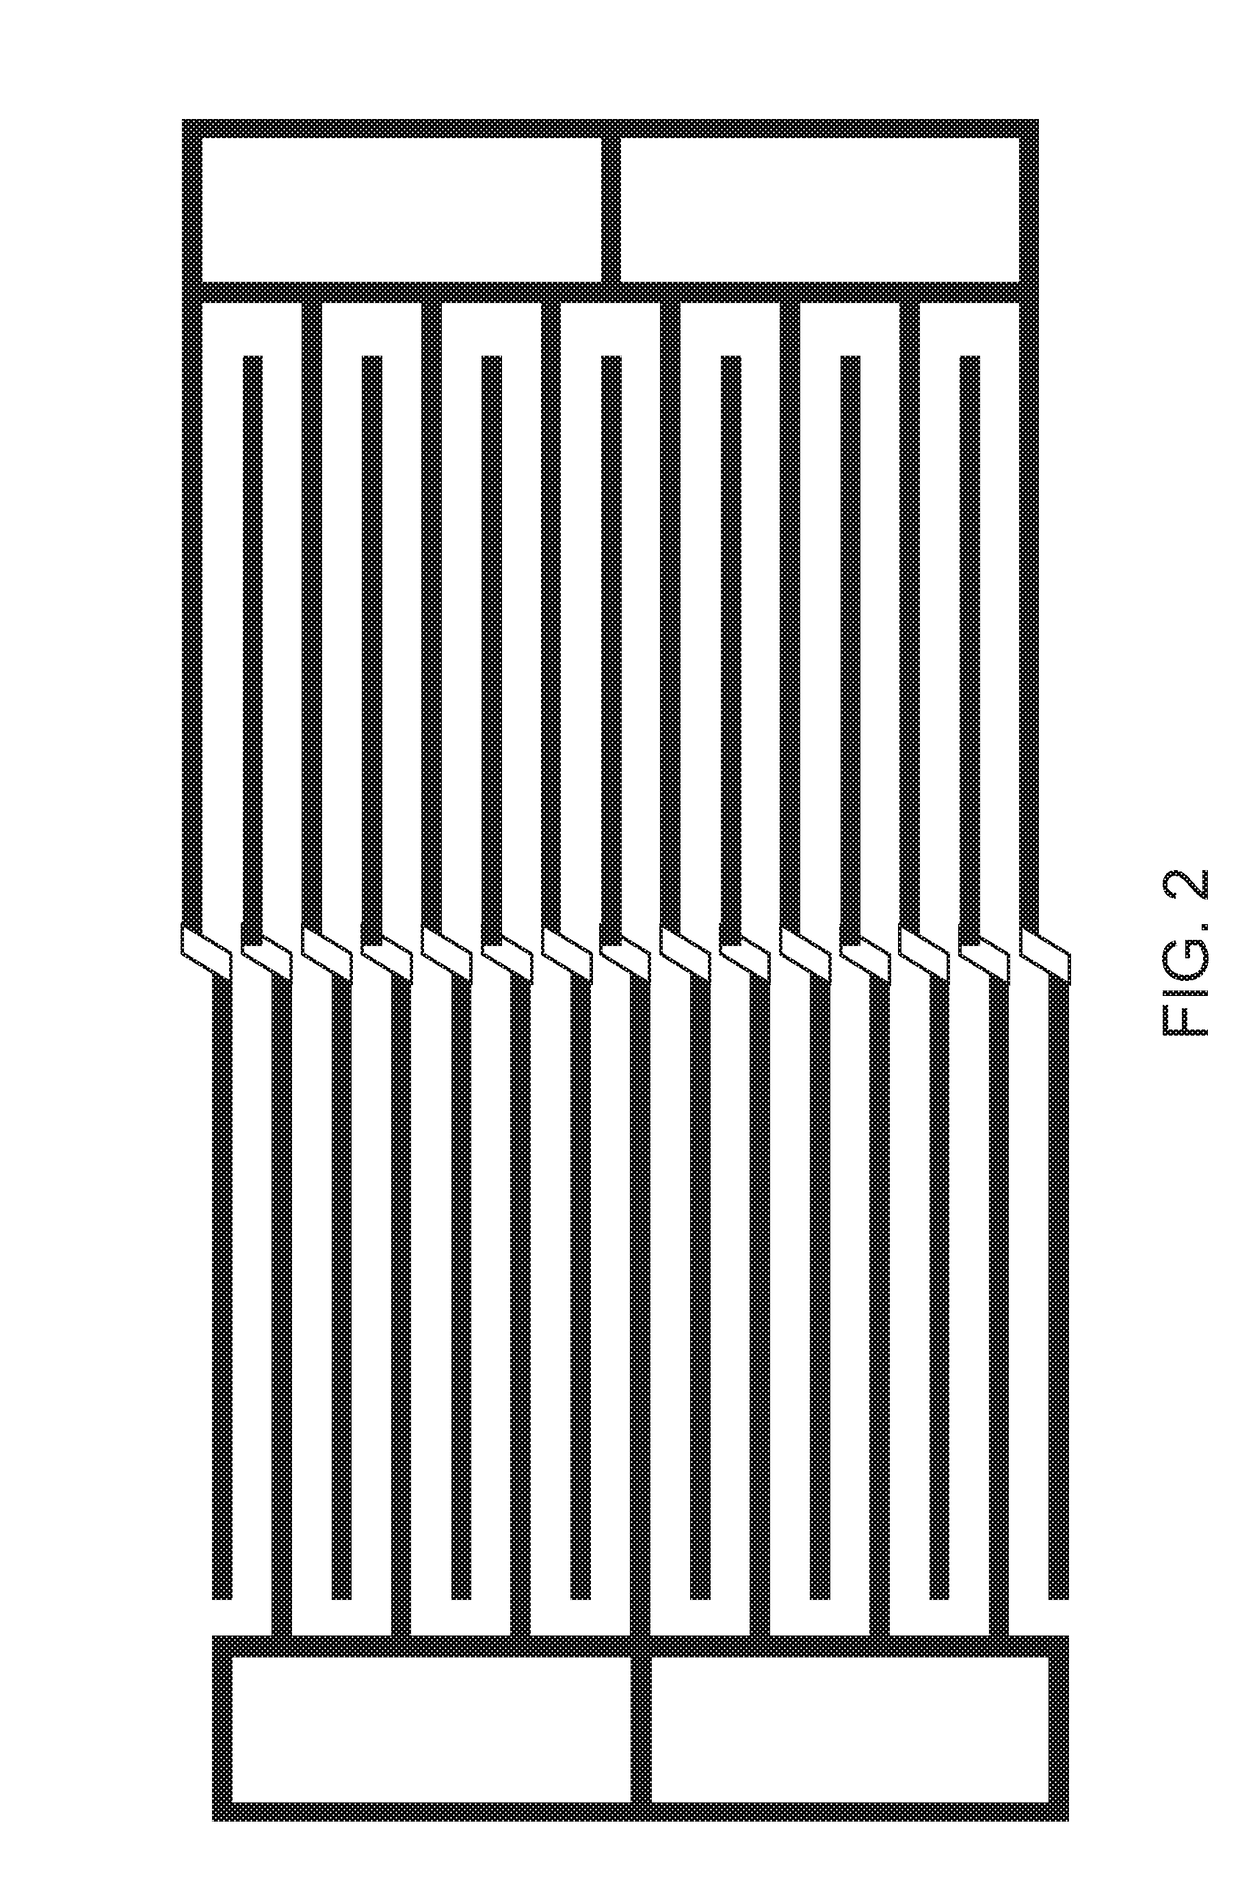 Disruption and field enabled delivery of compounds and compositions into cells